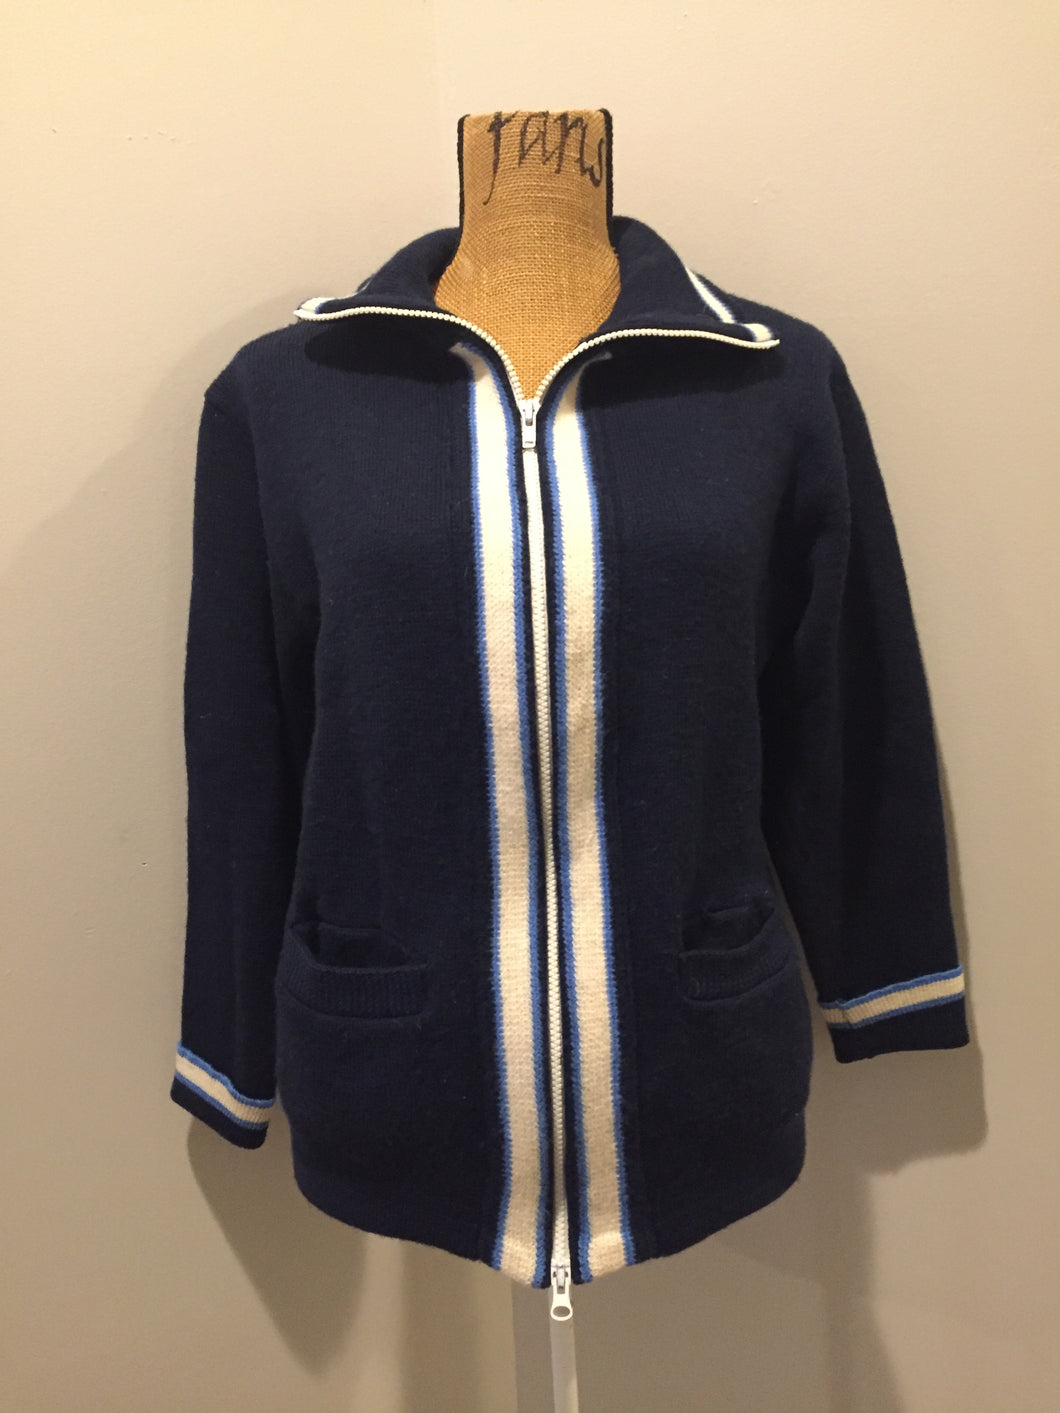 Kingspier Vintage - Vintage wool zip up cardigan in blue with white stripe trim, zipper closure and pockets. Made in Alberta. Size large.